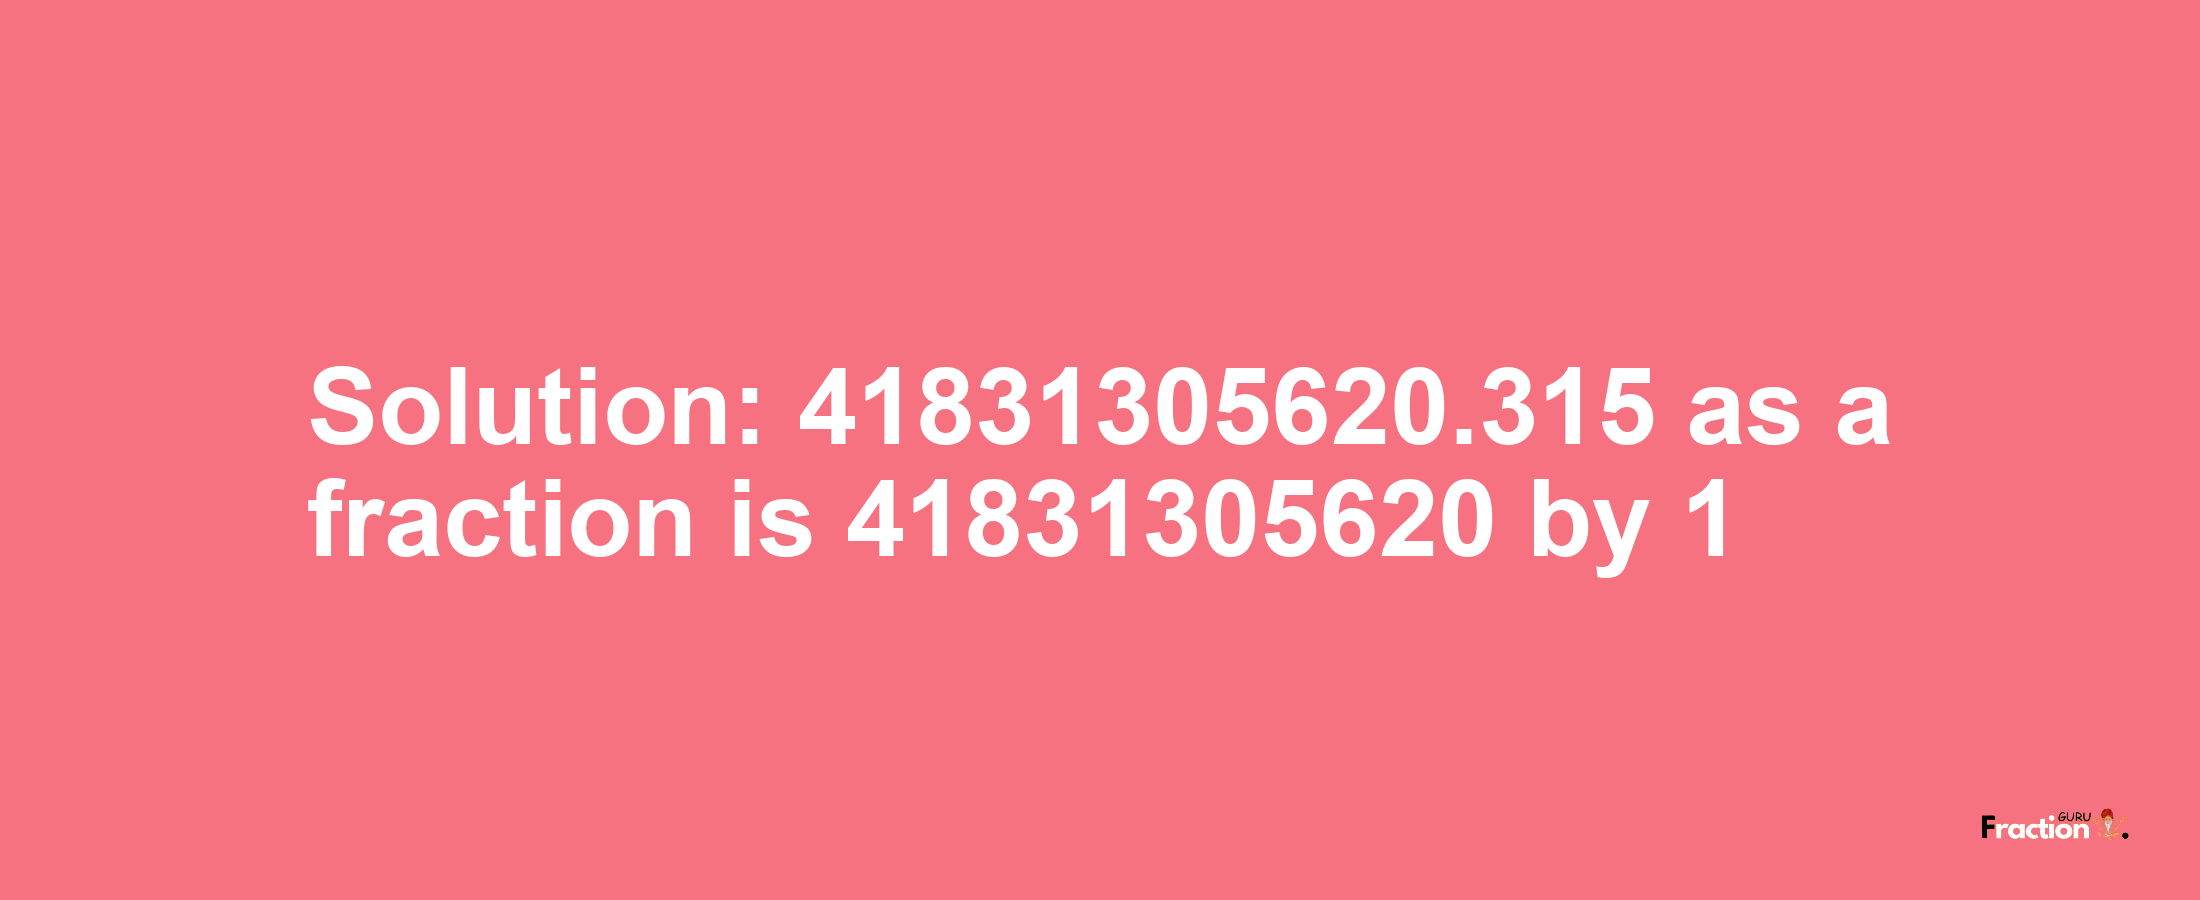 Solution:41831305620.315 as a fraction is 41831305620/1